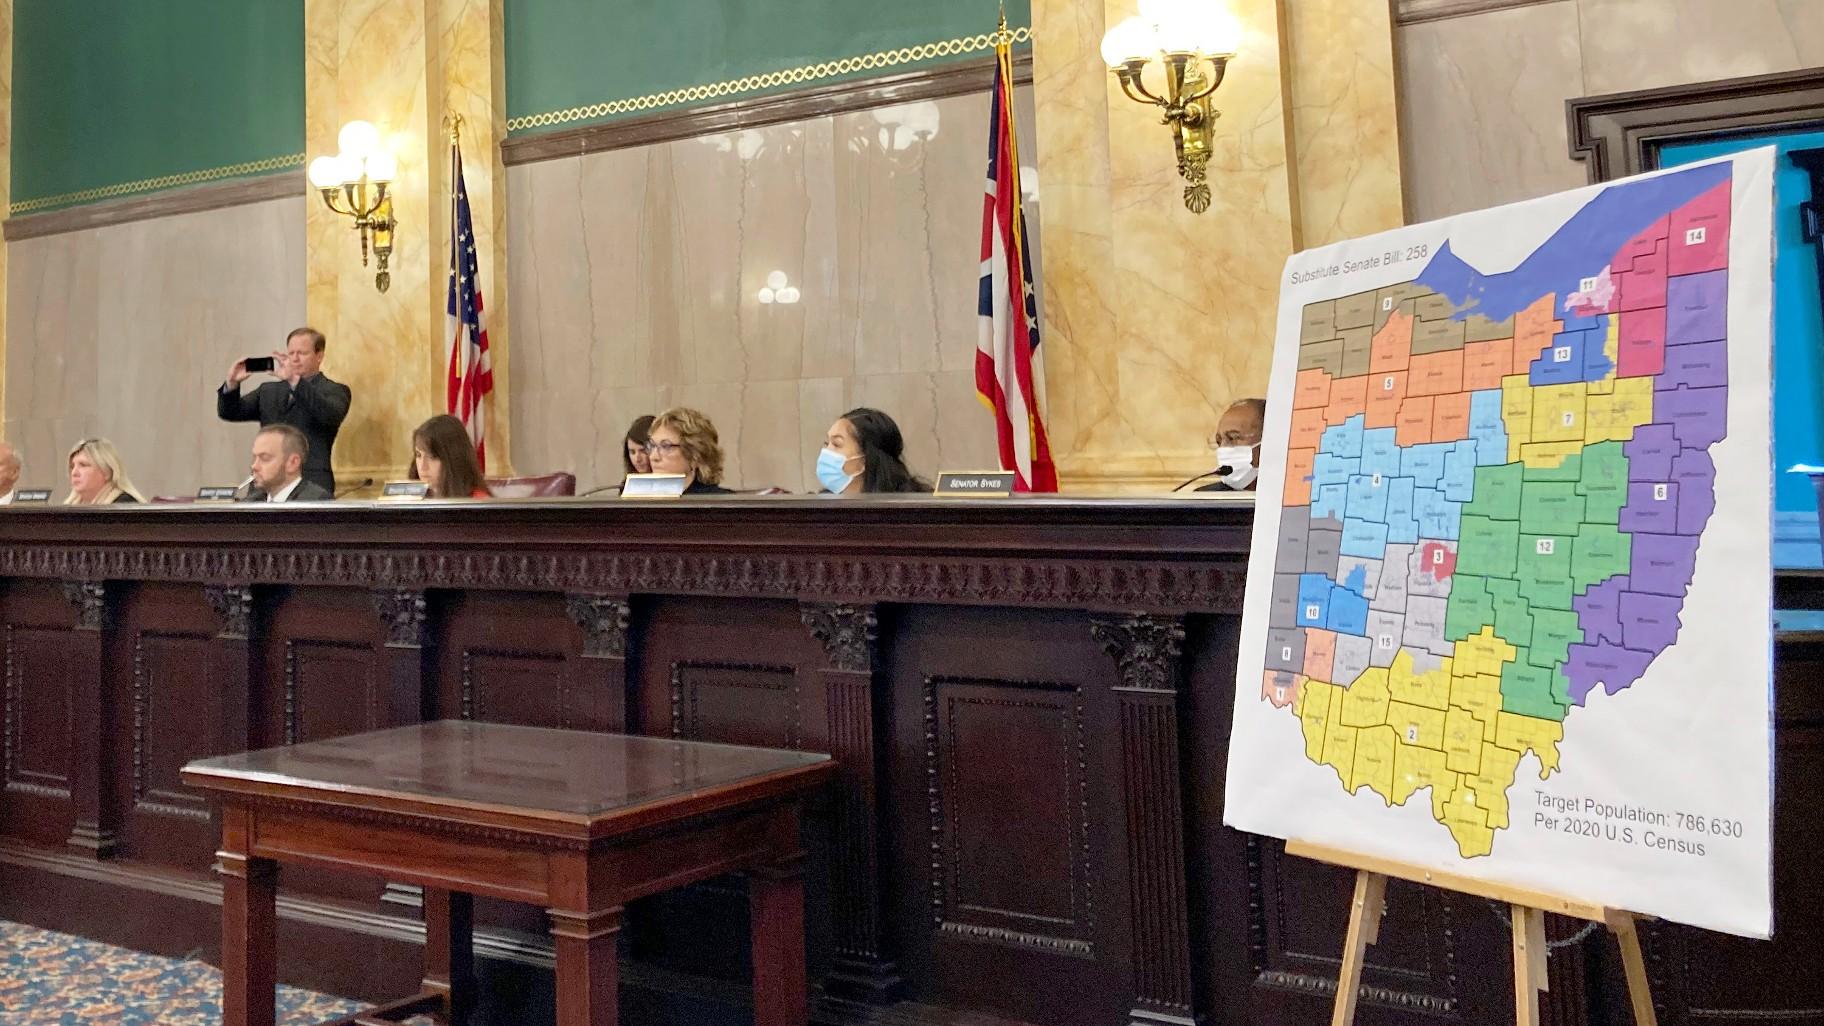 Members of the Ohio Senate Government Oversight Committee hear testimony on a new map of state congressional districts in this file photo from Nov. 16, 2021, at the Ohio Statehouse in Columbus, Ohio. (AP Photo / Julie Carr Smyth, File)